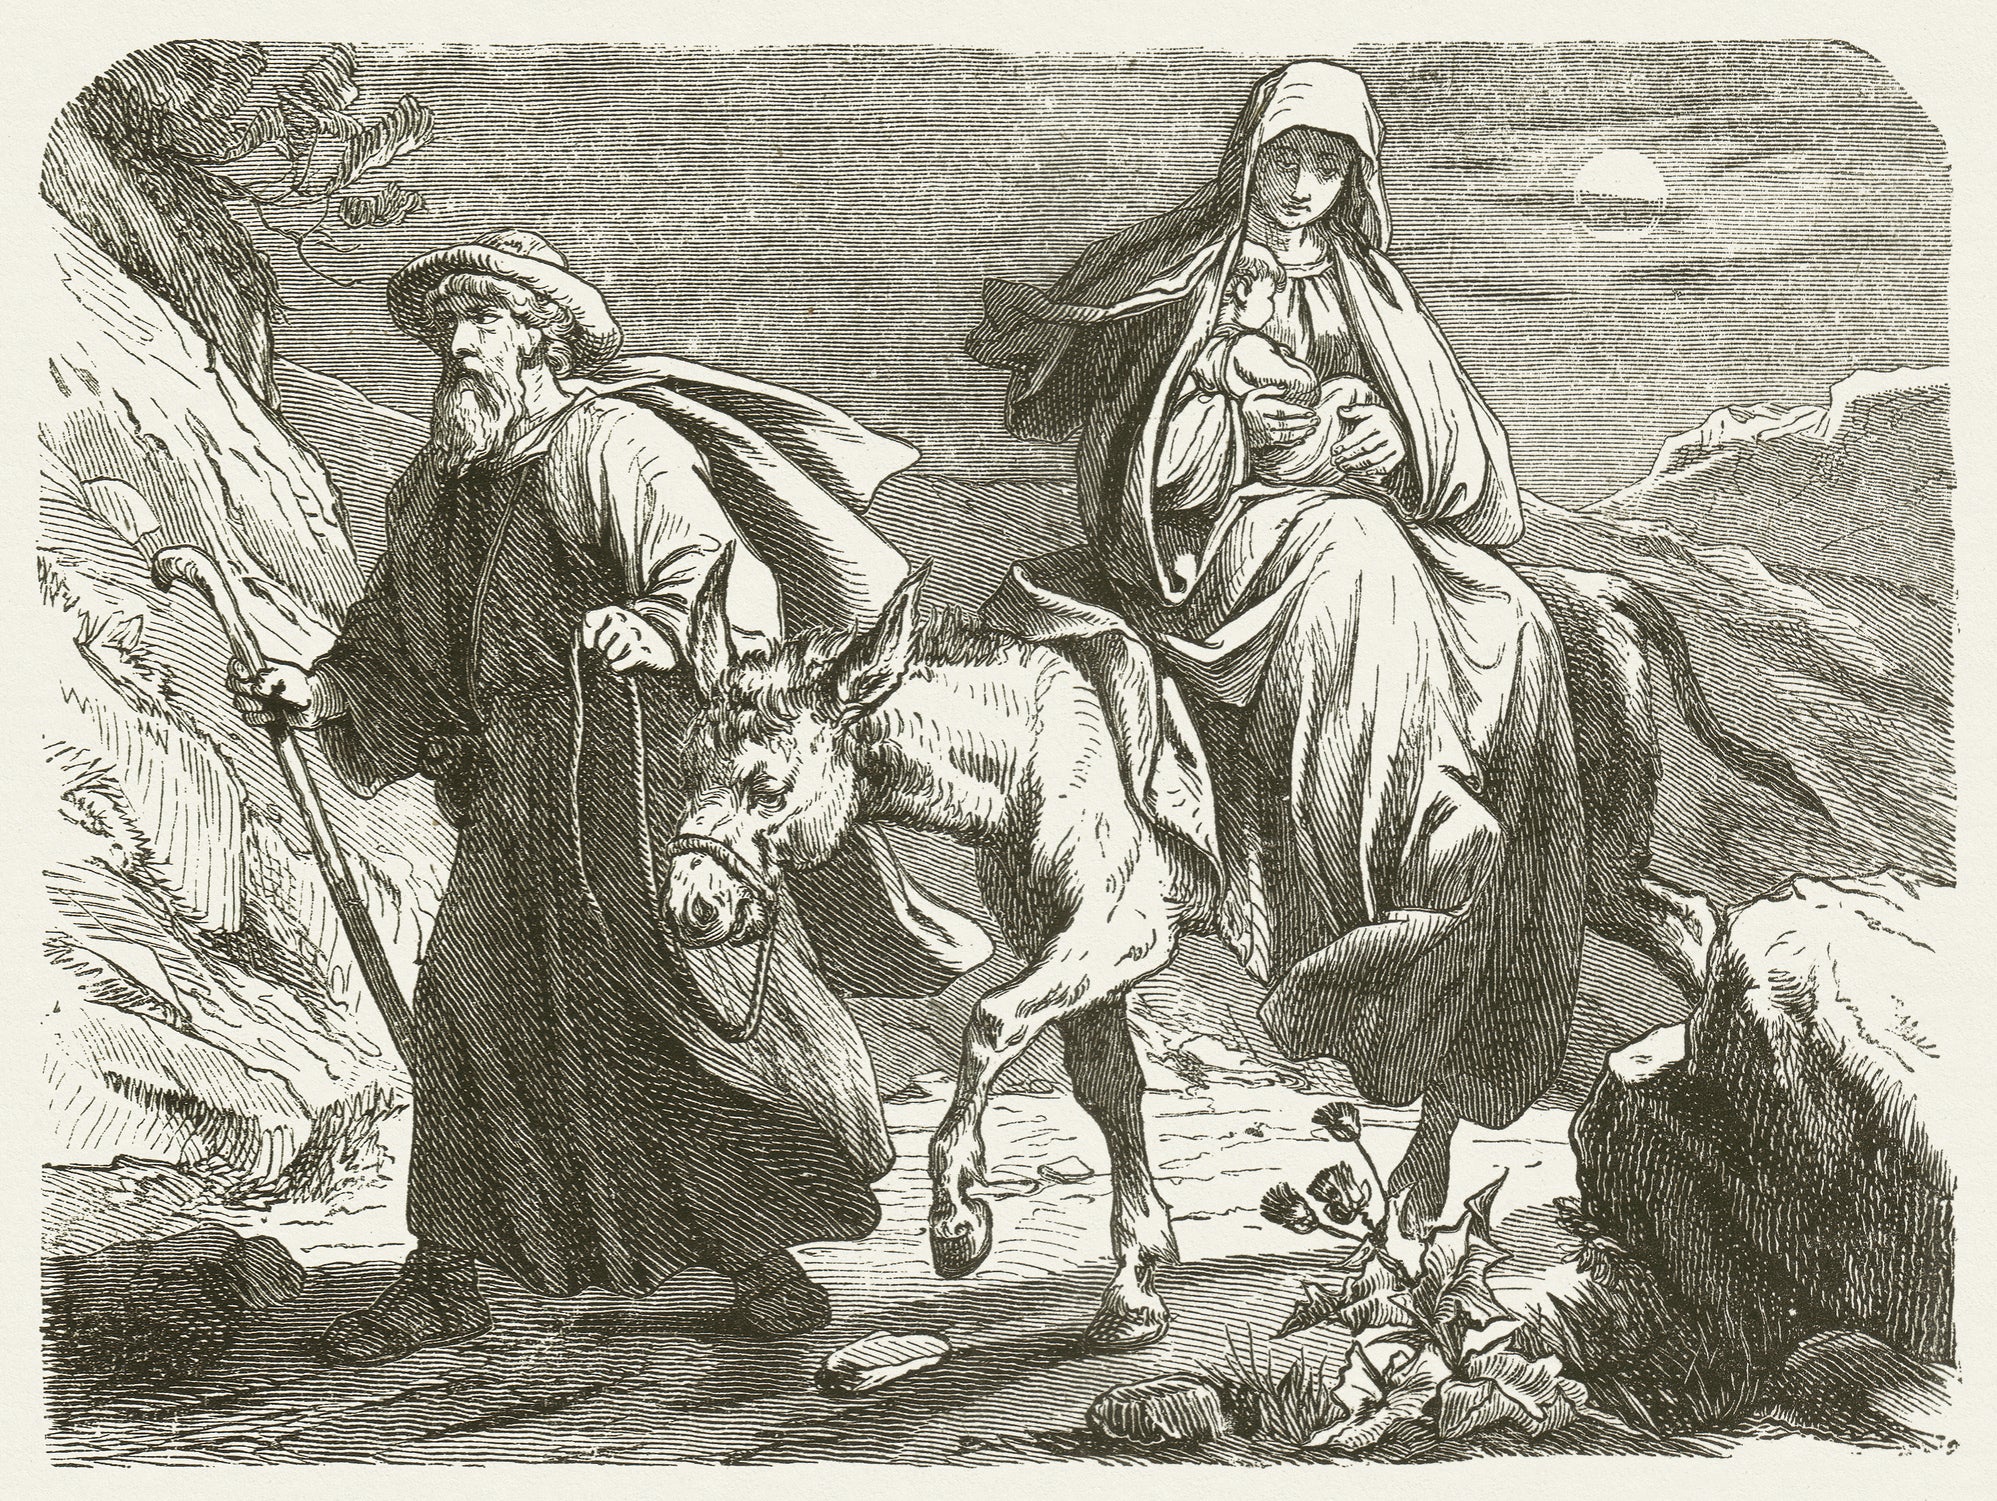 Woodcut engraving after a drawing by Julius Schnorr von Carolsfeld (1794-1872)